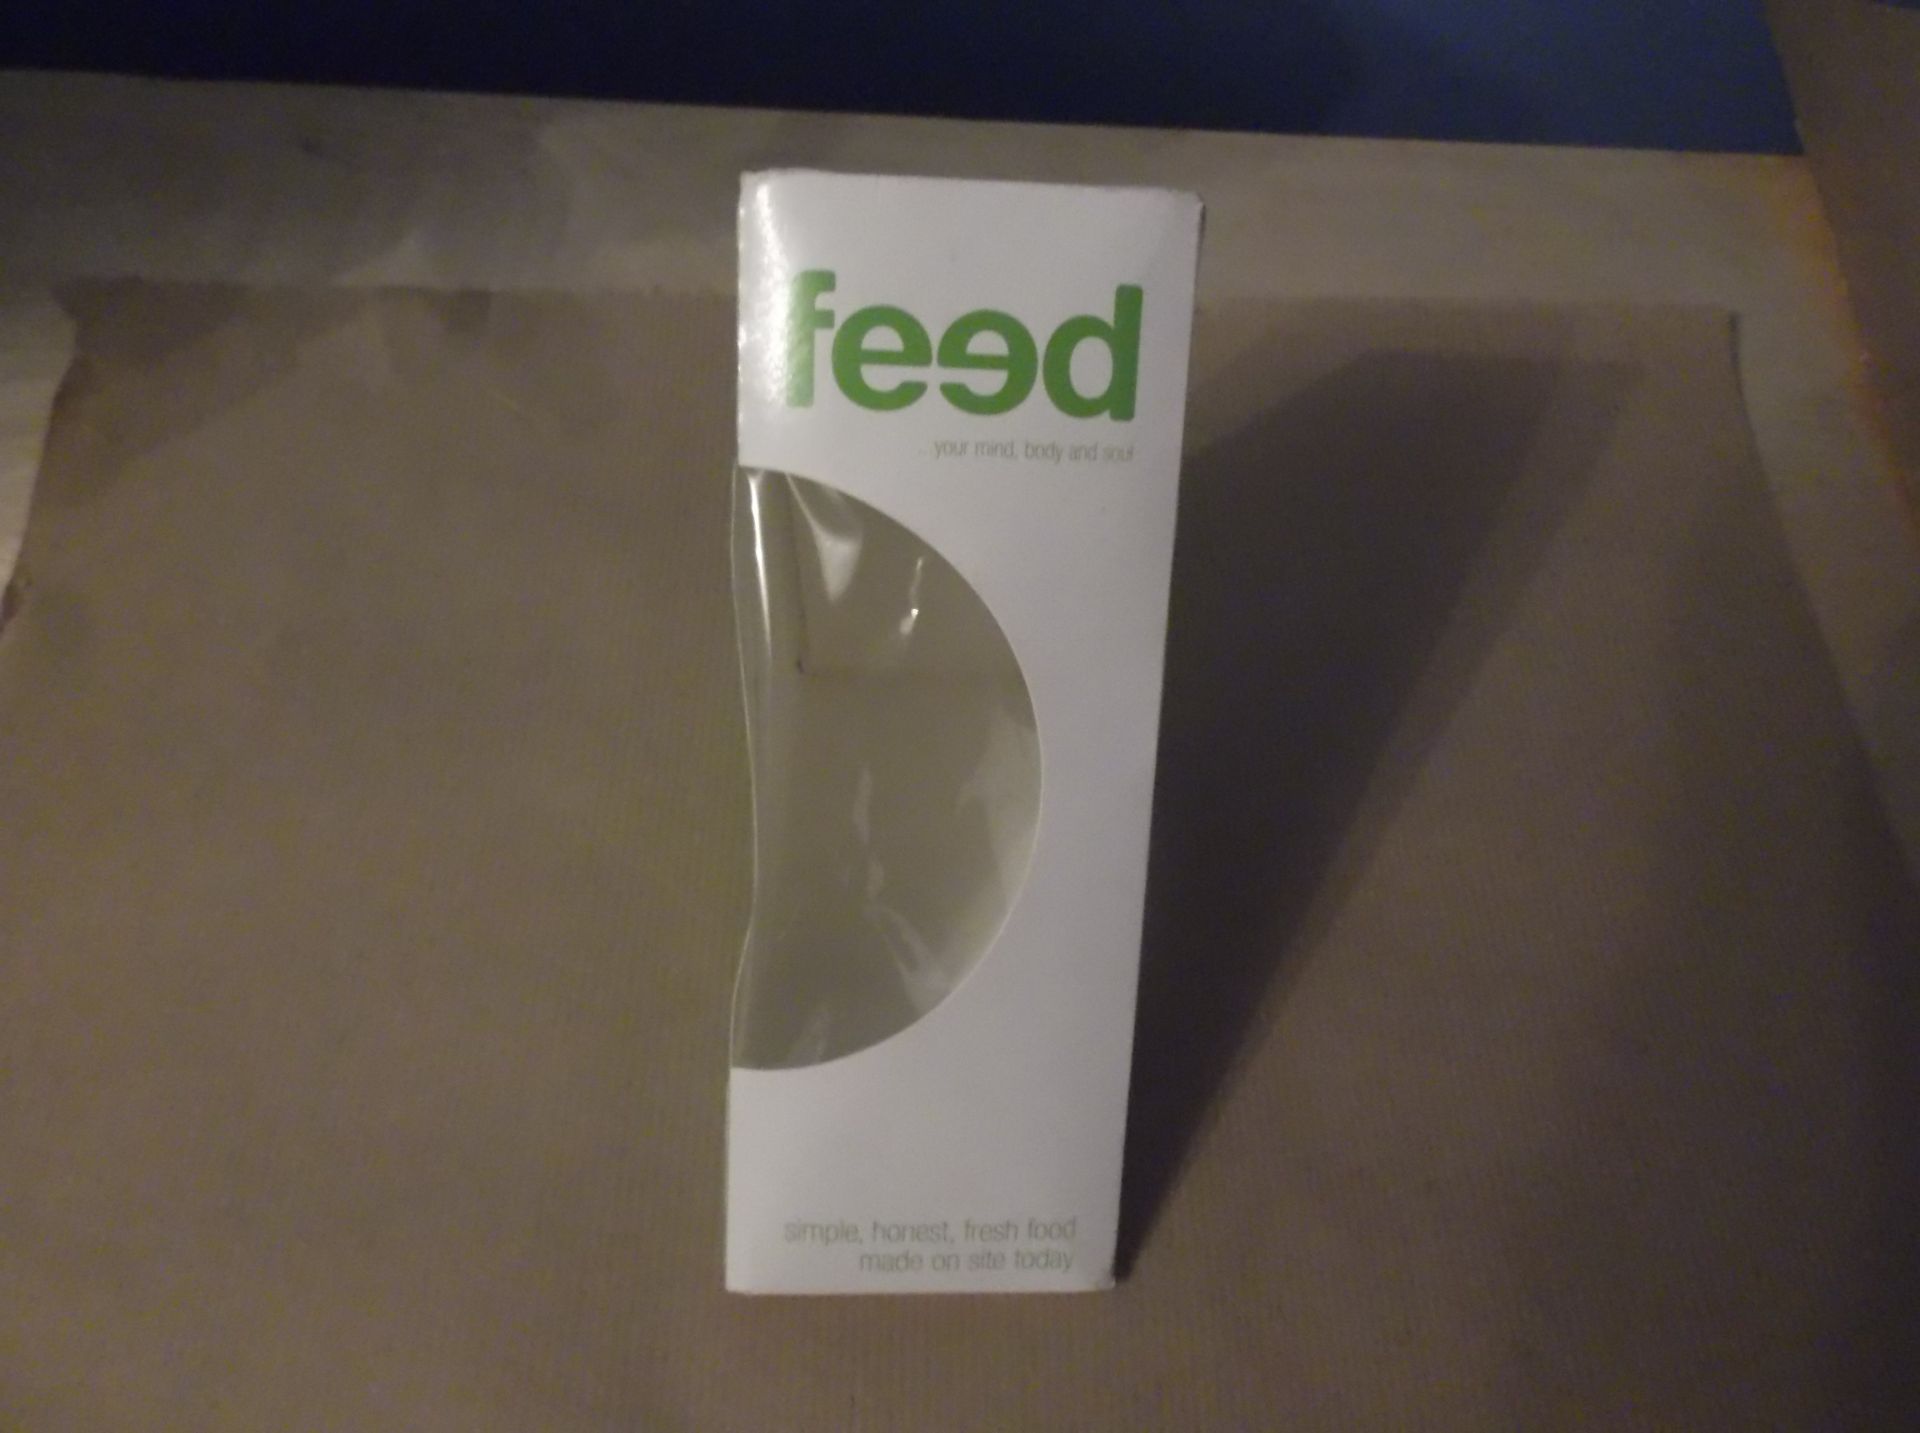 1 Bx Of 500 Eco Frendly Cardboard Sandwich Wedge - Image 3 of 6